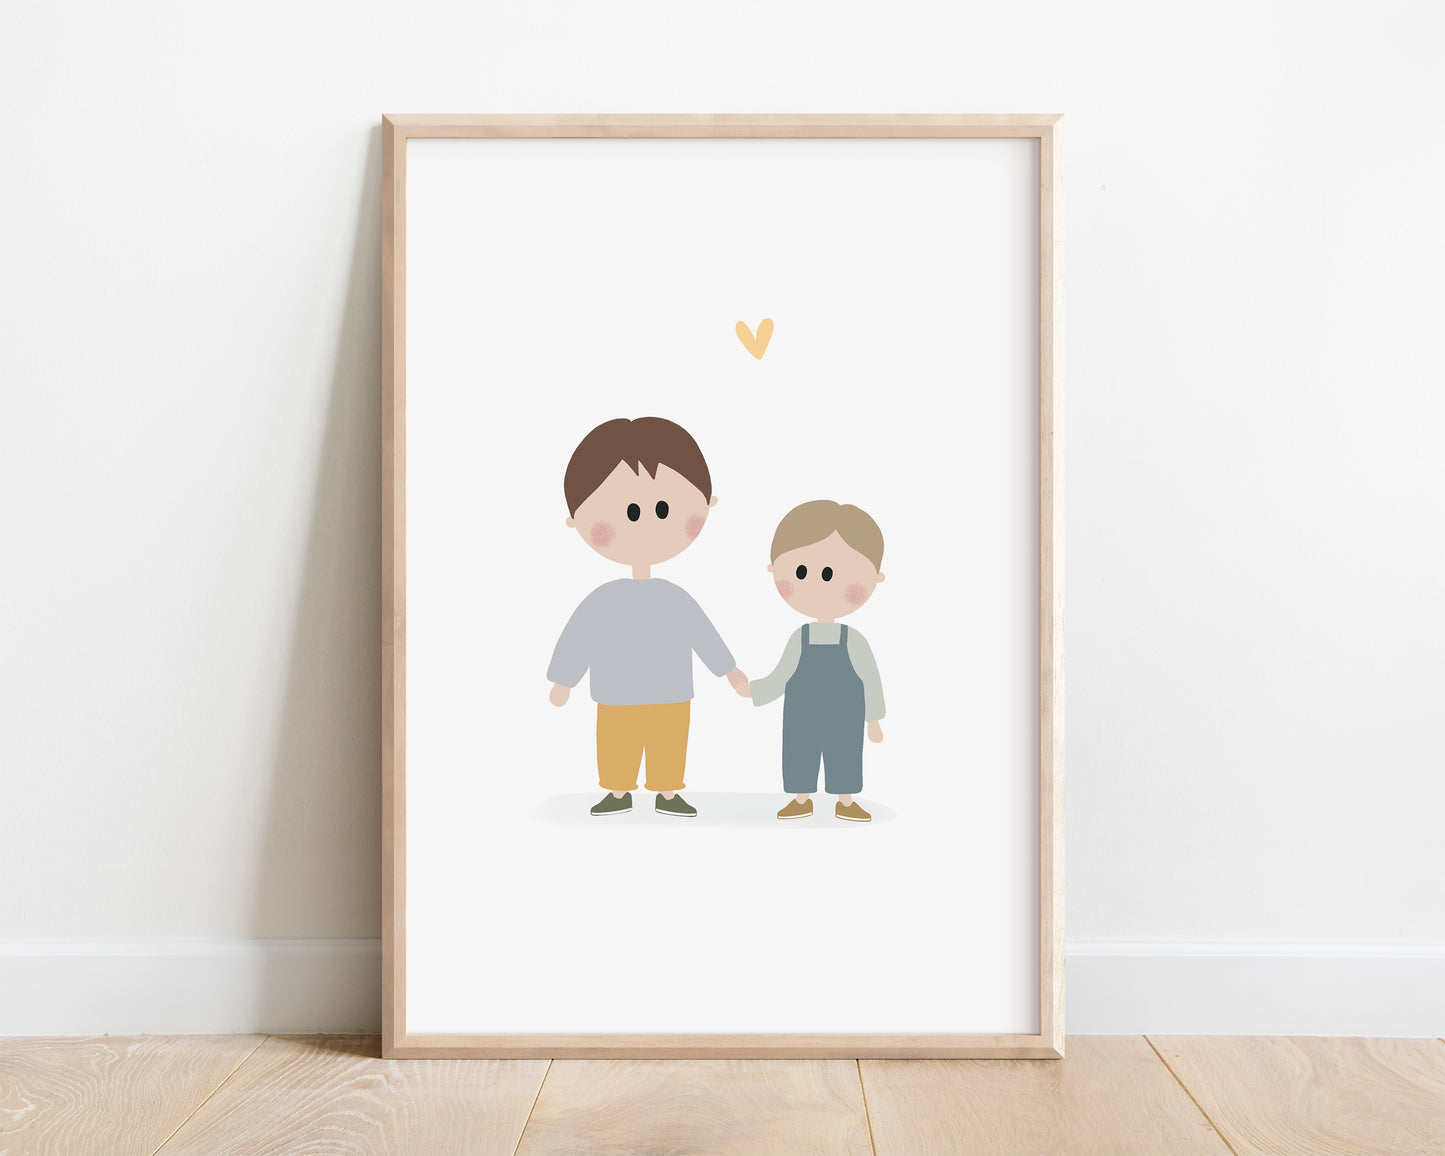 A beautifully illustrated art print featuring little brothers. This poster certainly brings joy and tenderness to your walls with soft pastel colors.